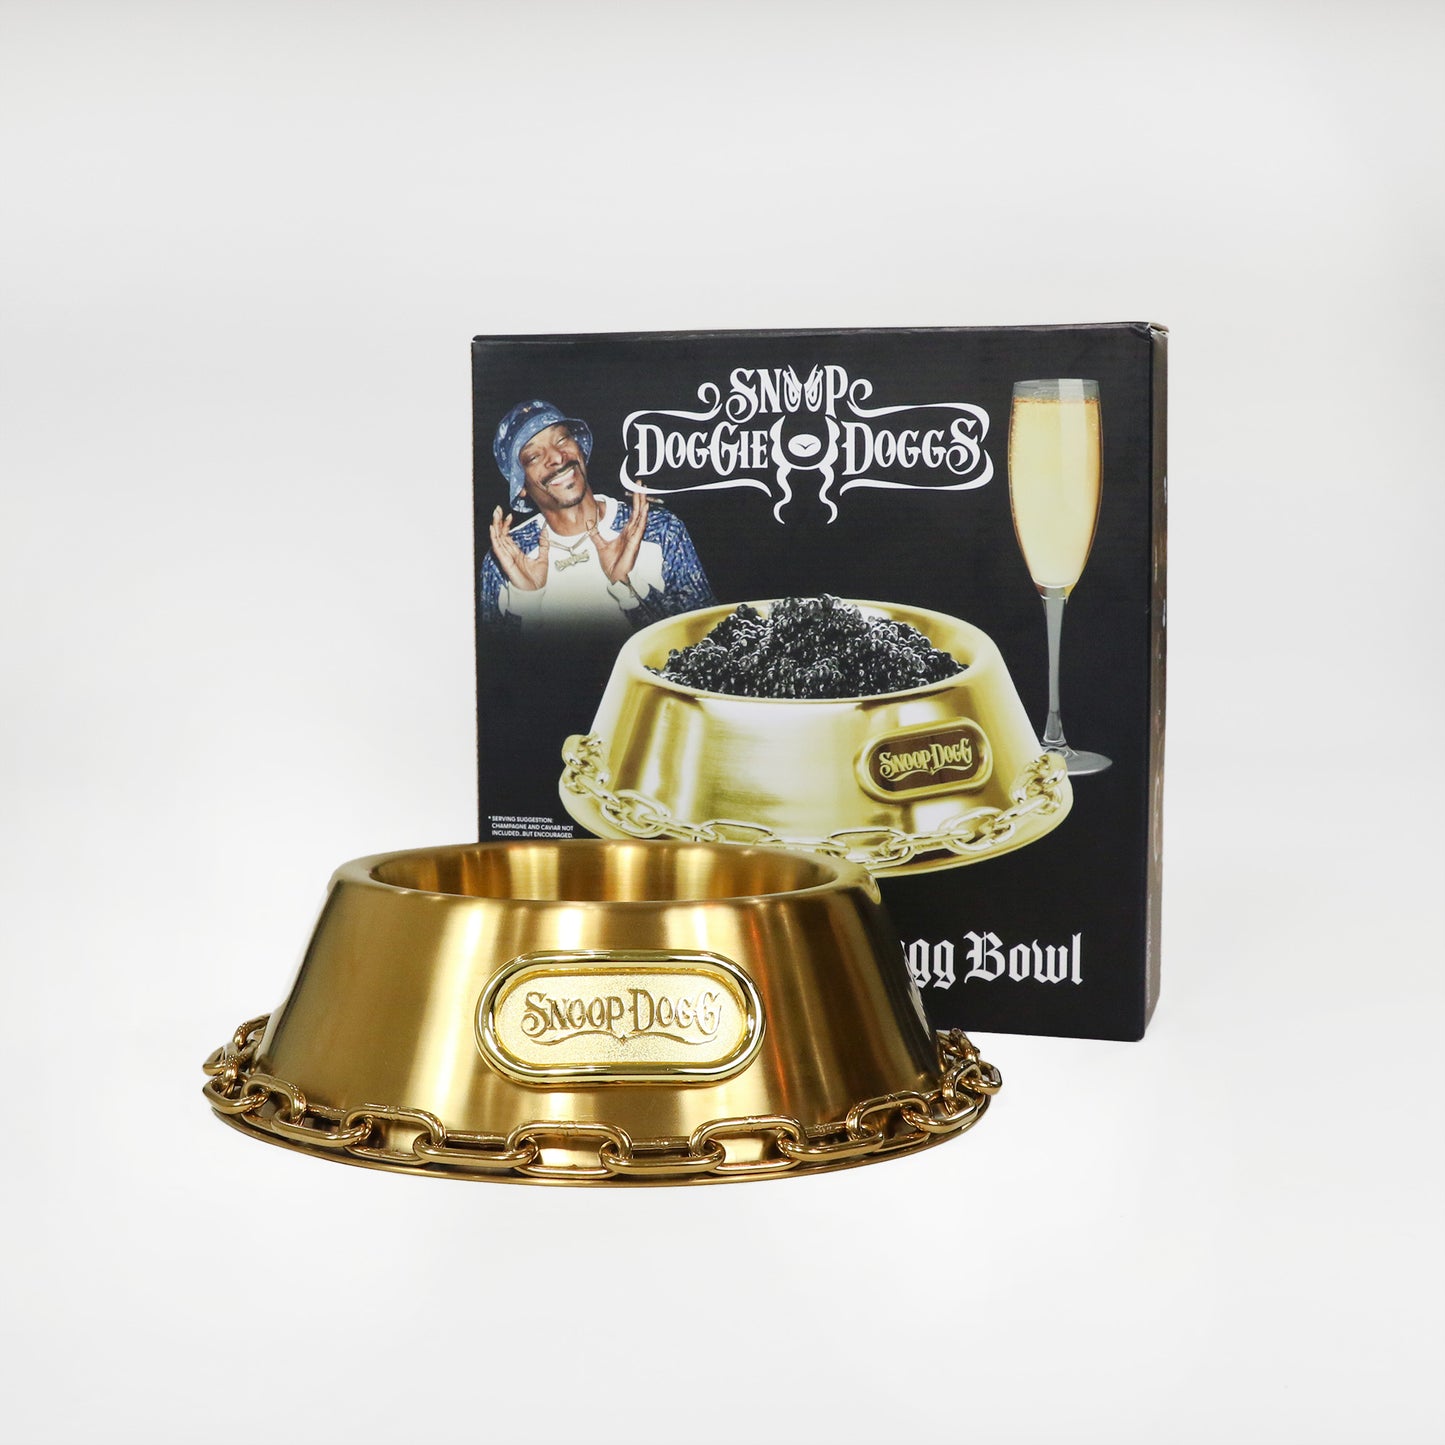 Product flat lay of the Deluxe Gold Pet Bowl and packaging.